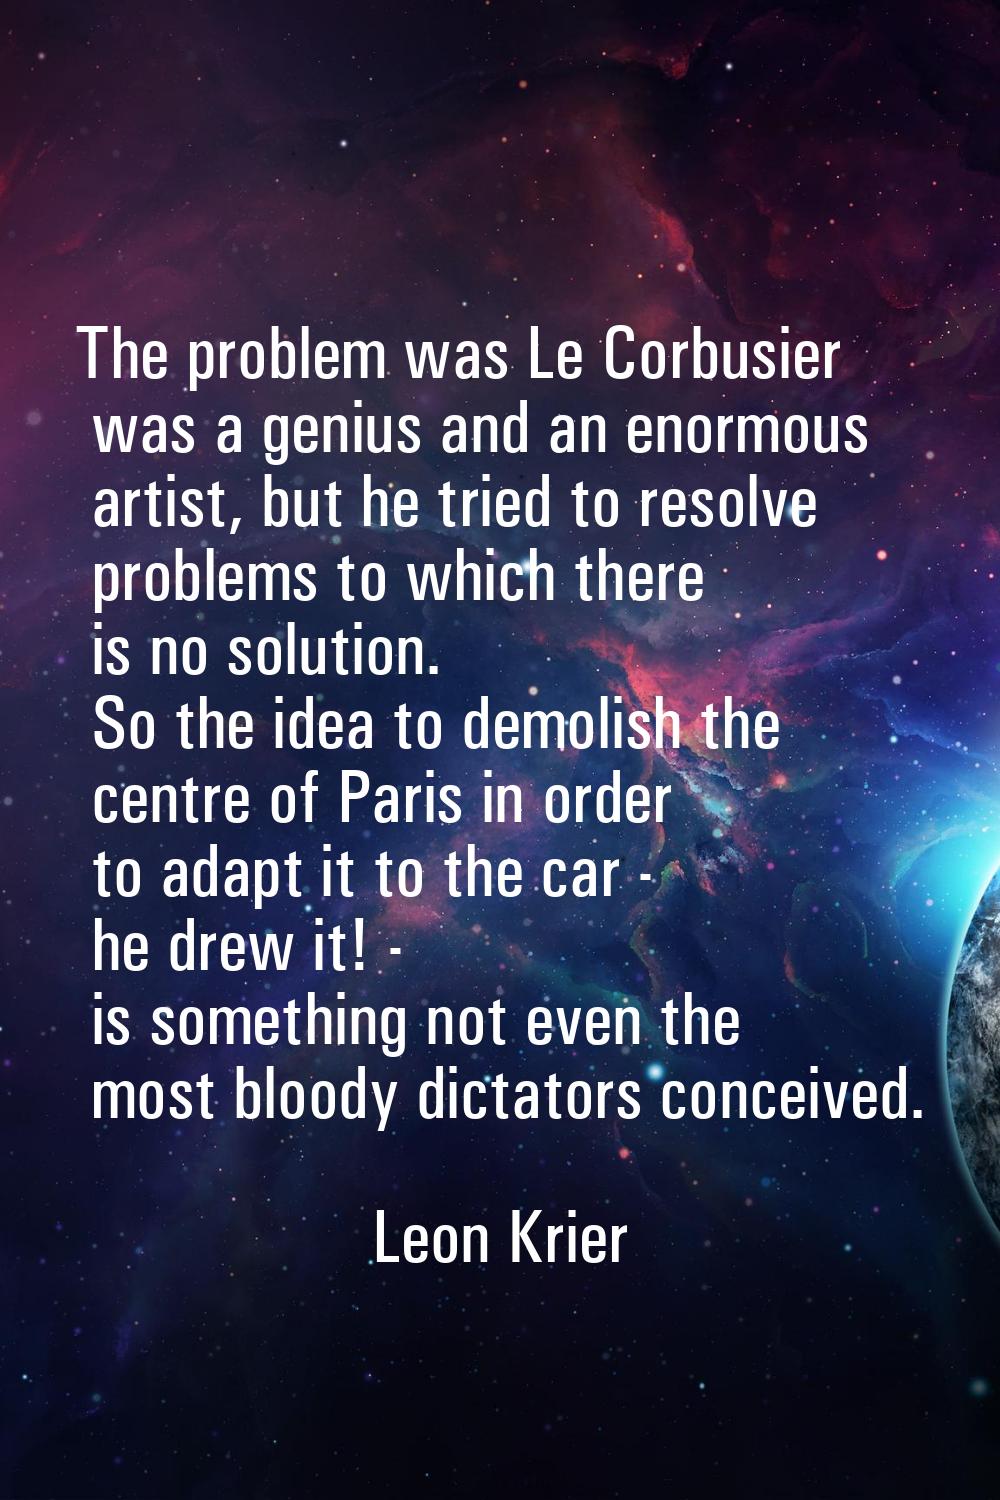 The problem was Le Corbusier was a genius and an enormous artist, but he tried to resolve problems 